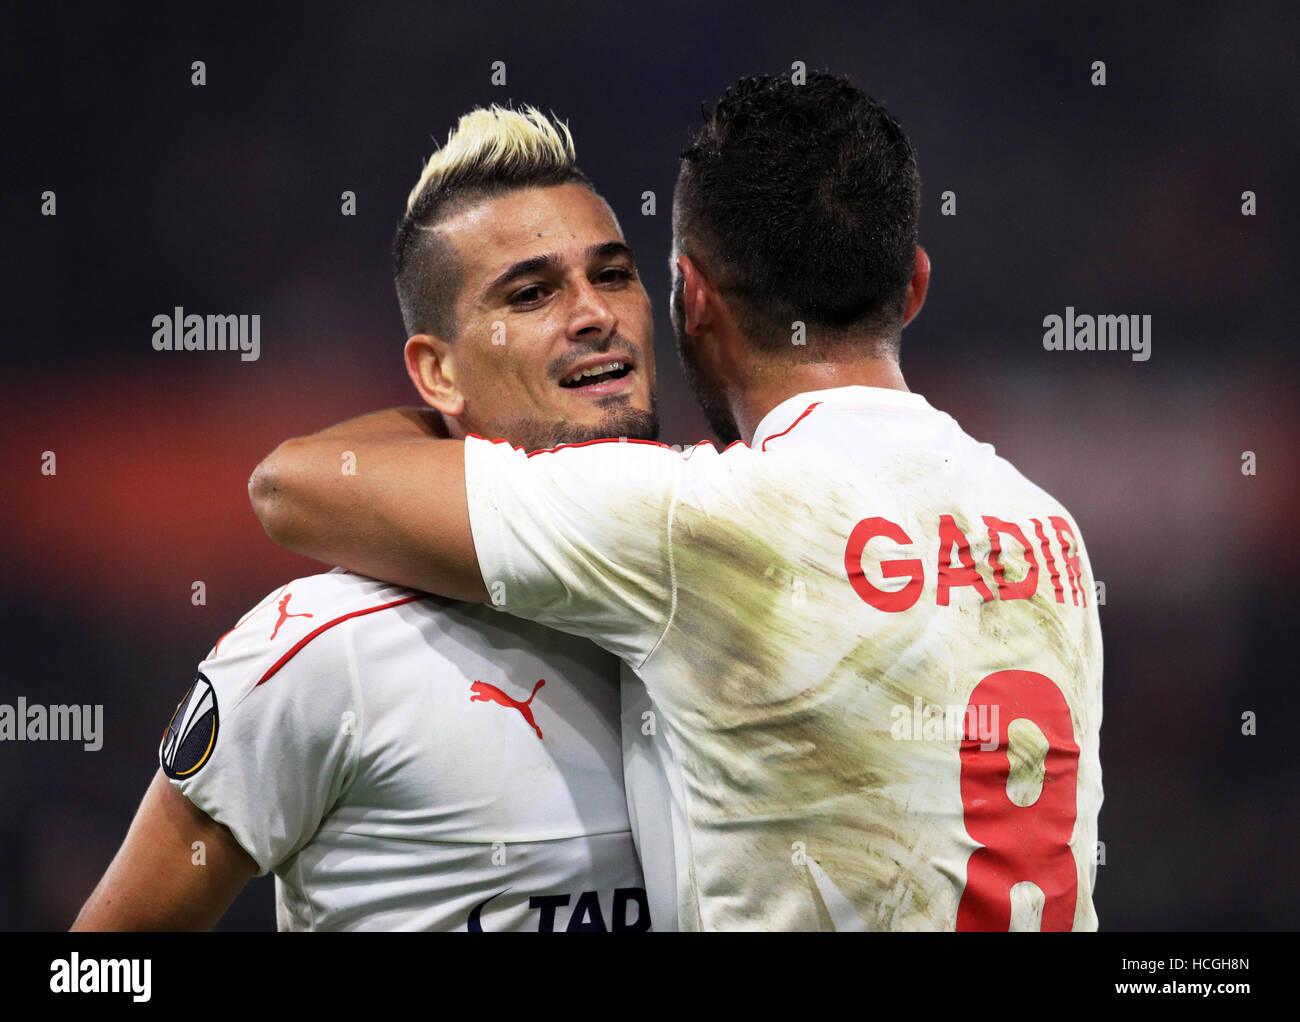 Hapoel Be'er Sheva's Maor Bar Buzaglo and Mohammad Ghadir celebrate victory after the UEFA Europa League, Group K match at St Mary's Stadium, Southampton. Stock Photo